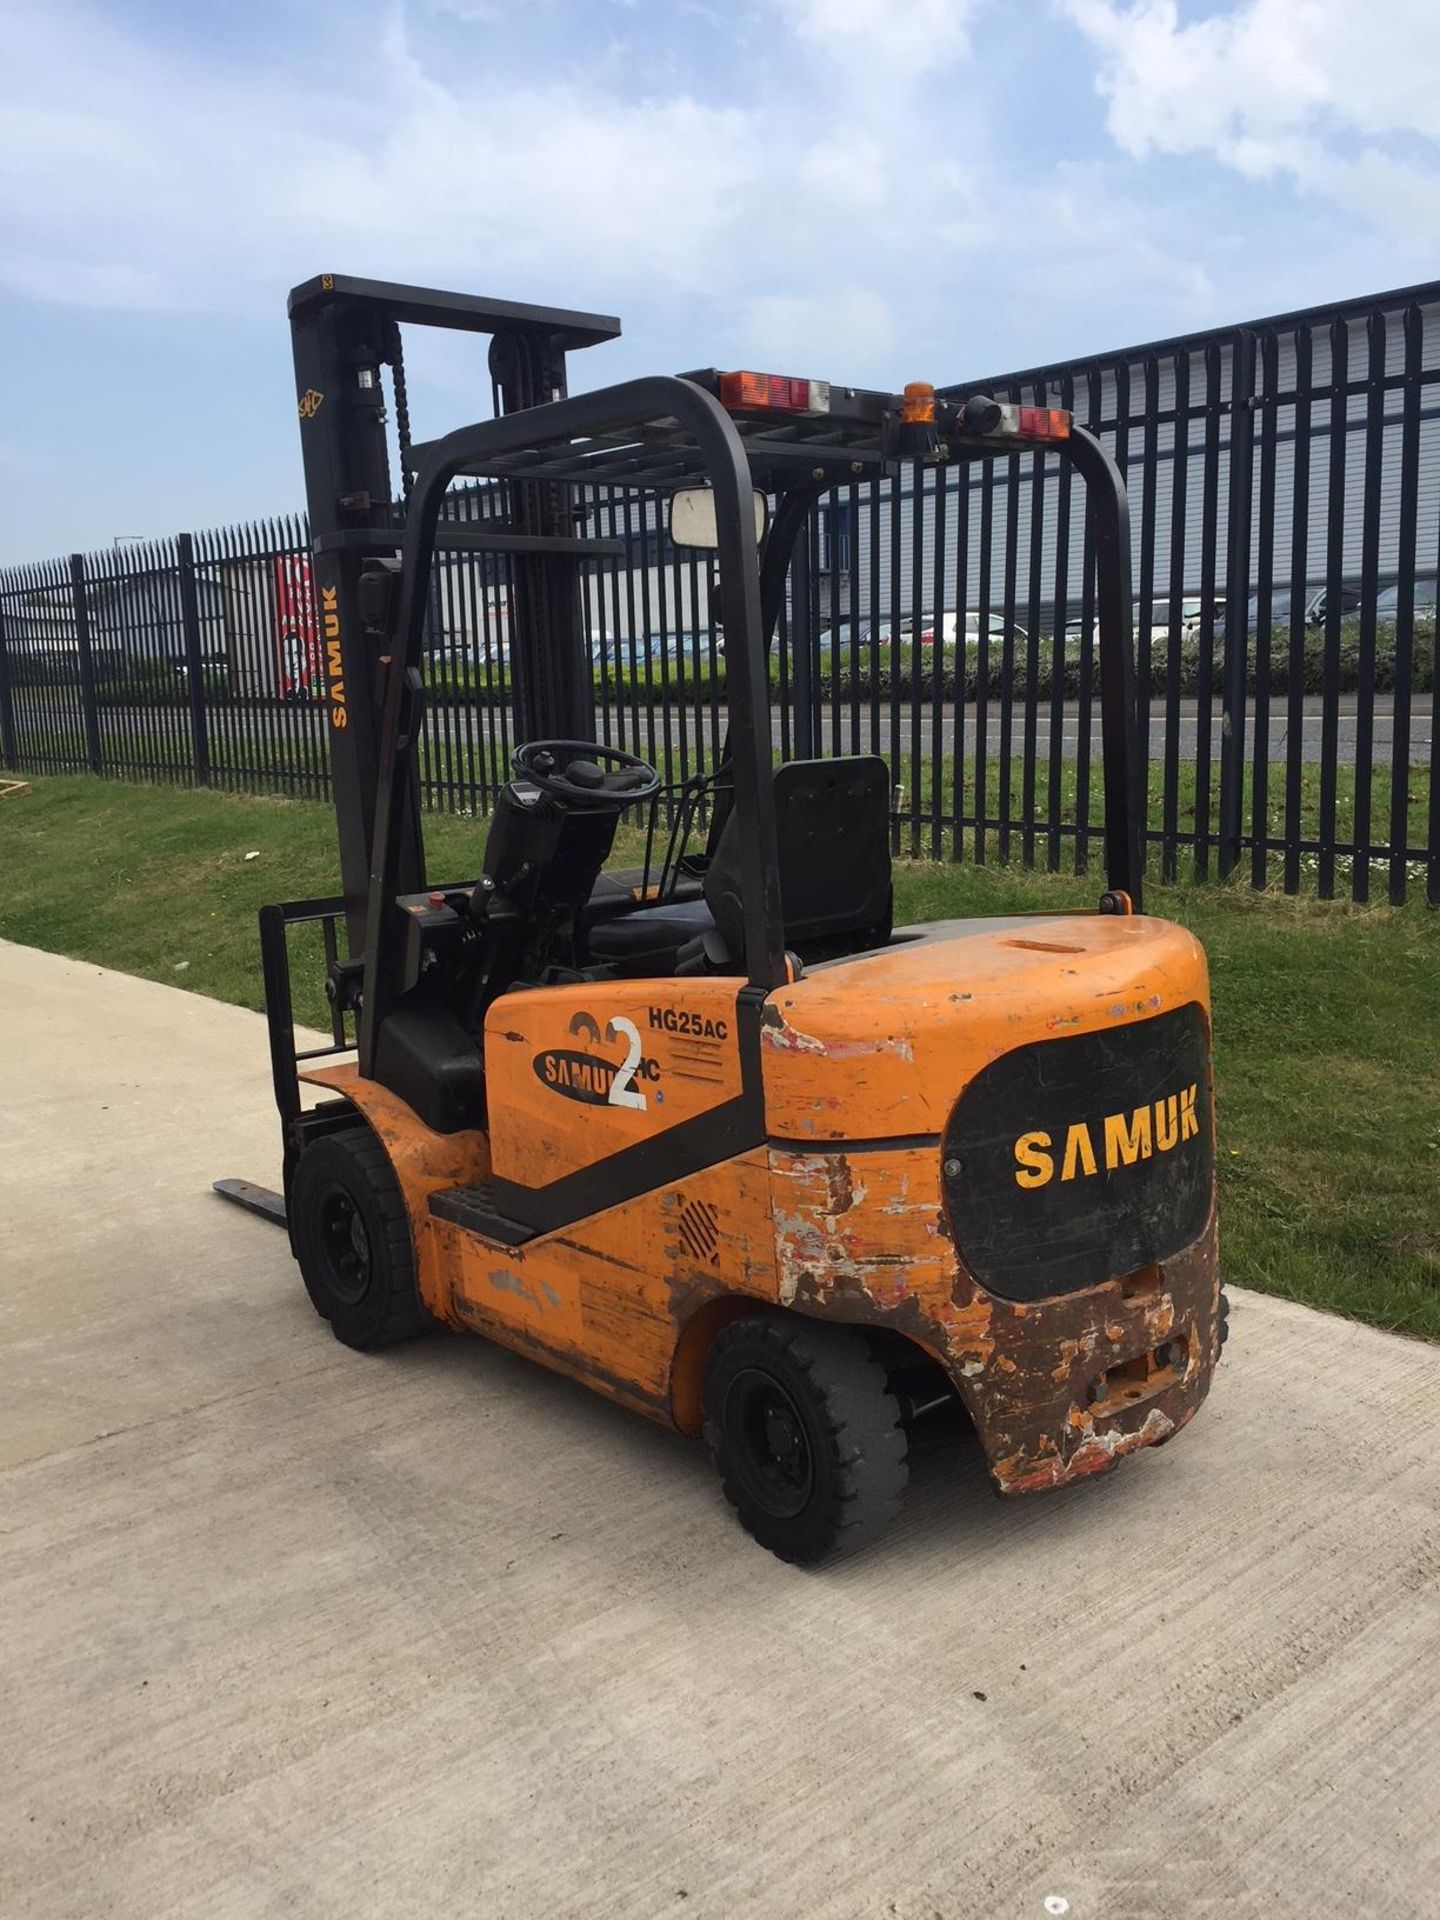 Sam-uk electric counterbalance fork lift truck - Image 8 of 10